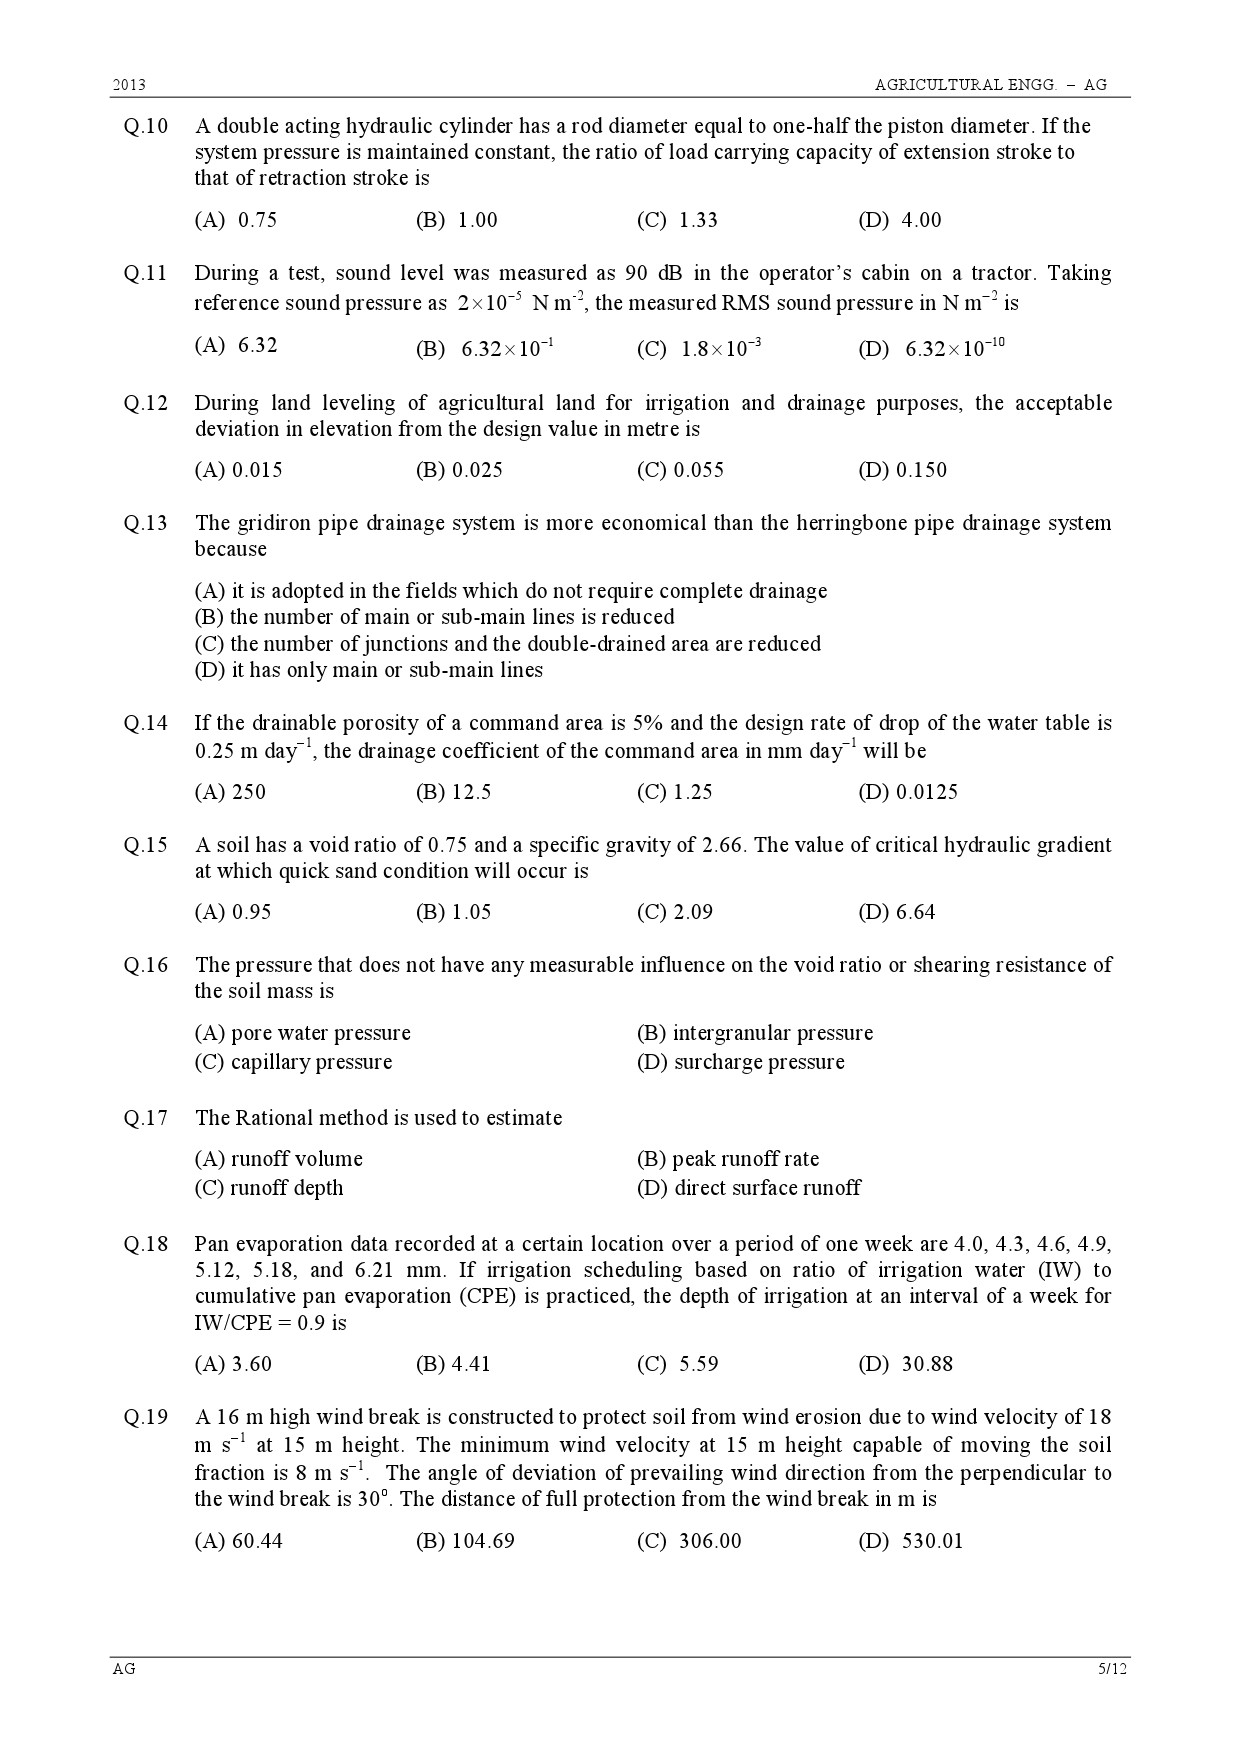 GATE Exam Question Paper 2013 Agricultural Engineering 5